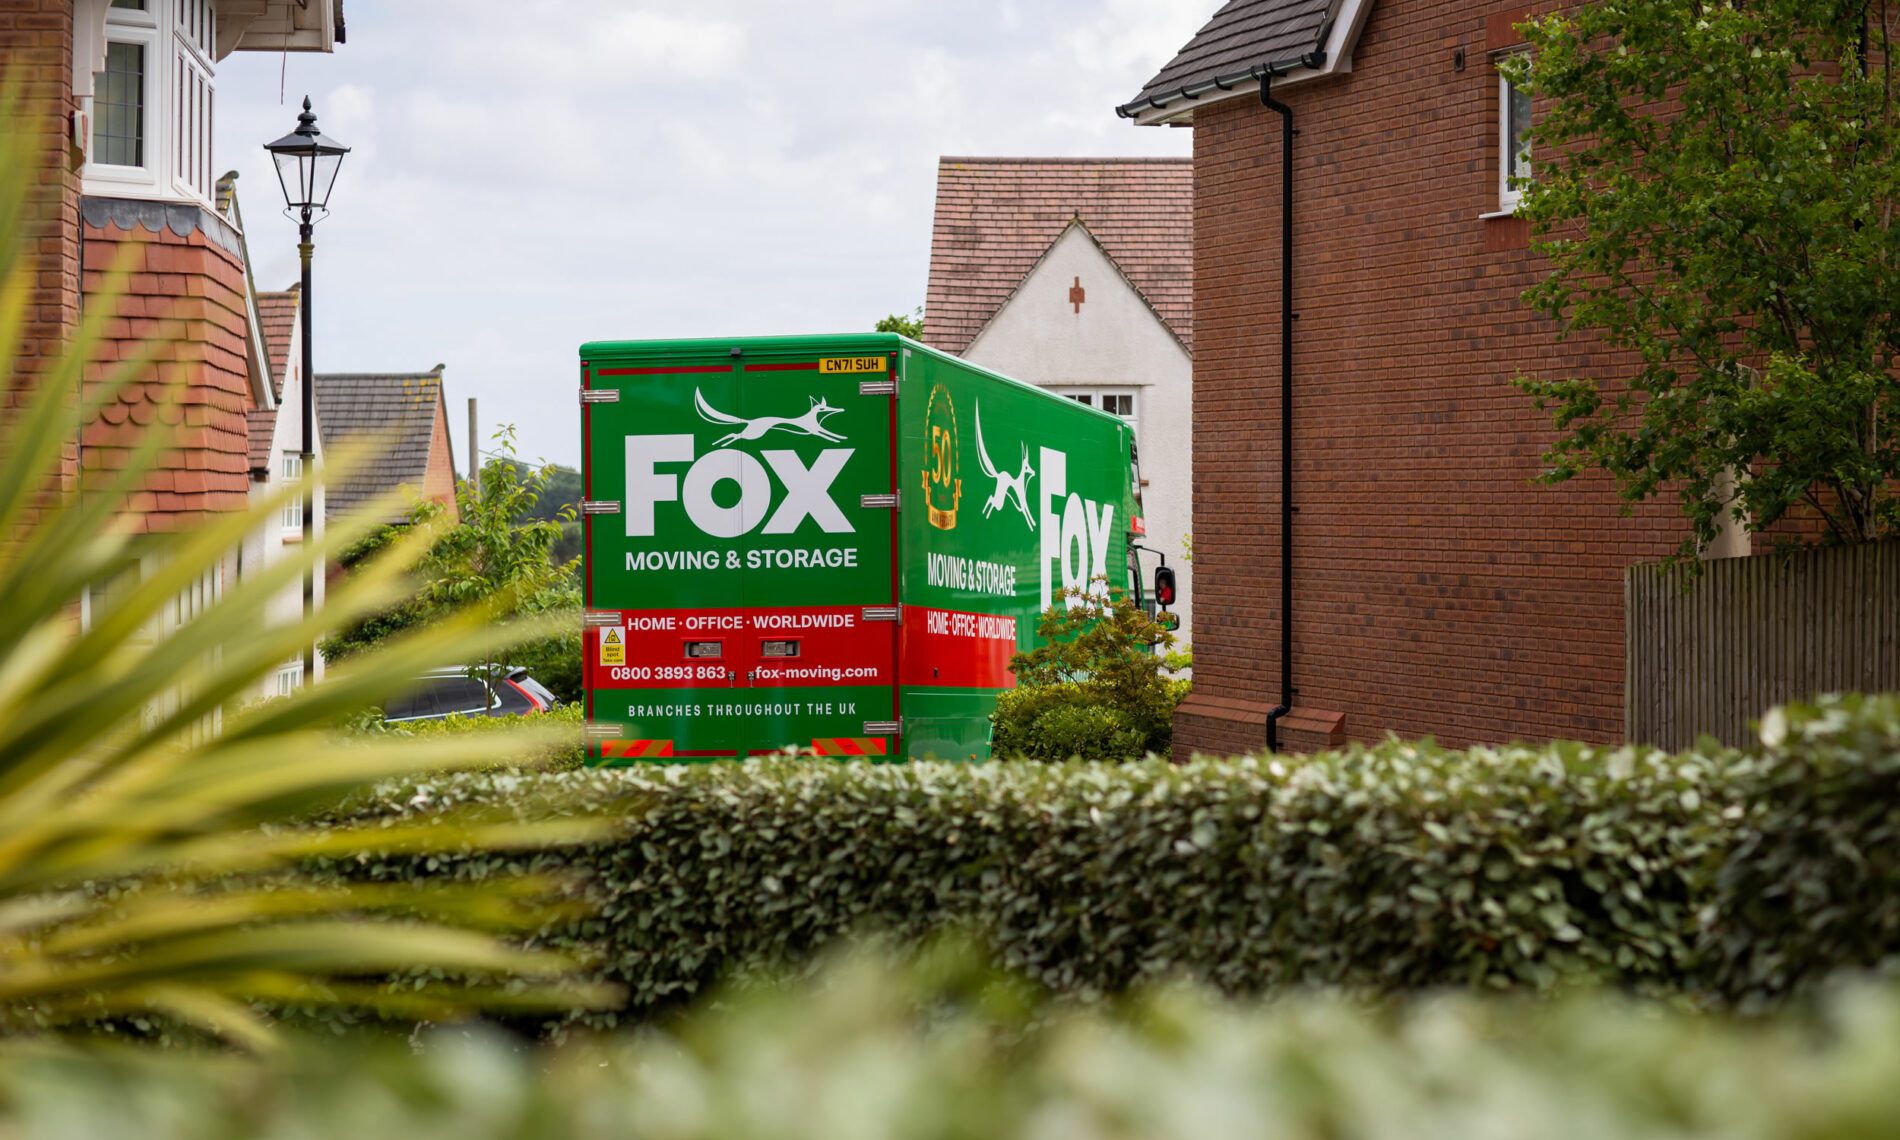 fox moving and storage van outside a house